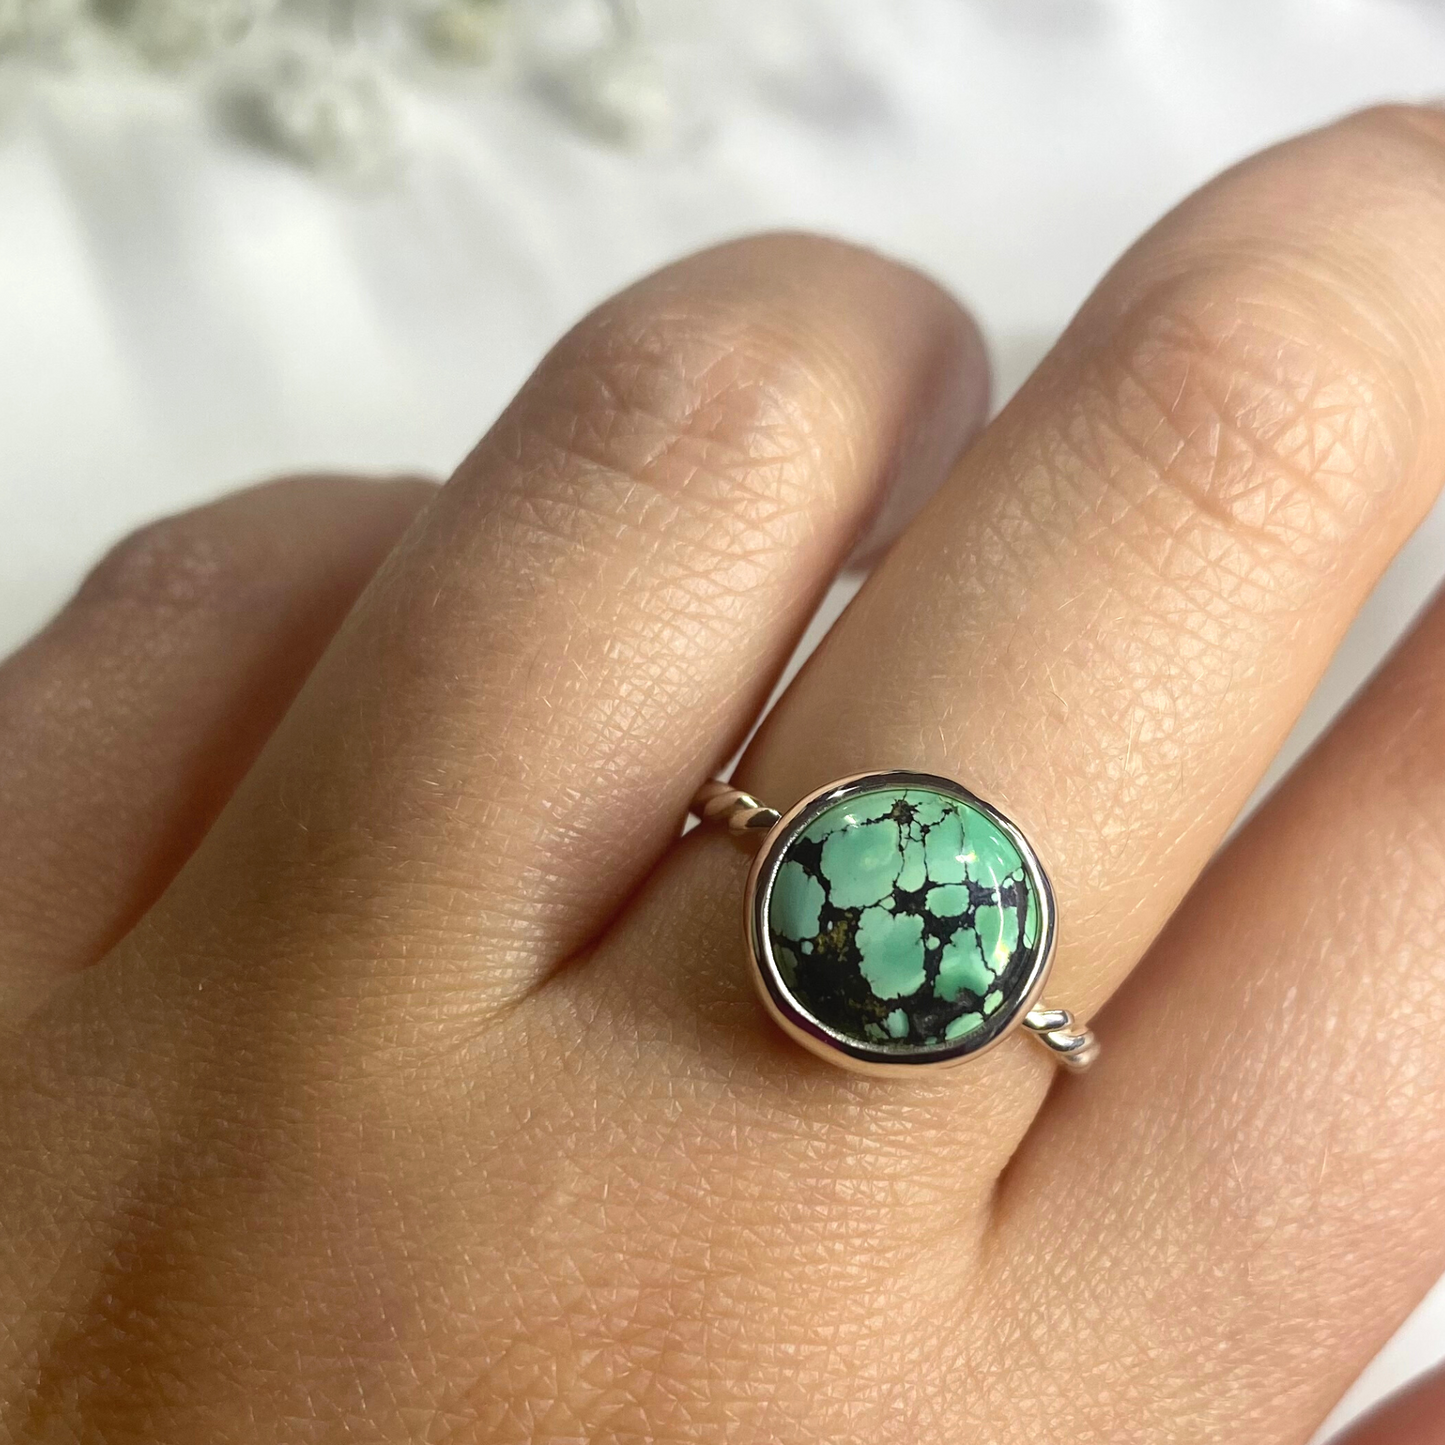 Rare Tibetan Turquoise Ring With A Twist